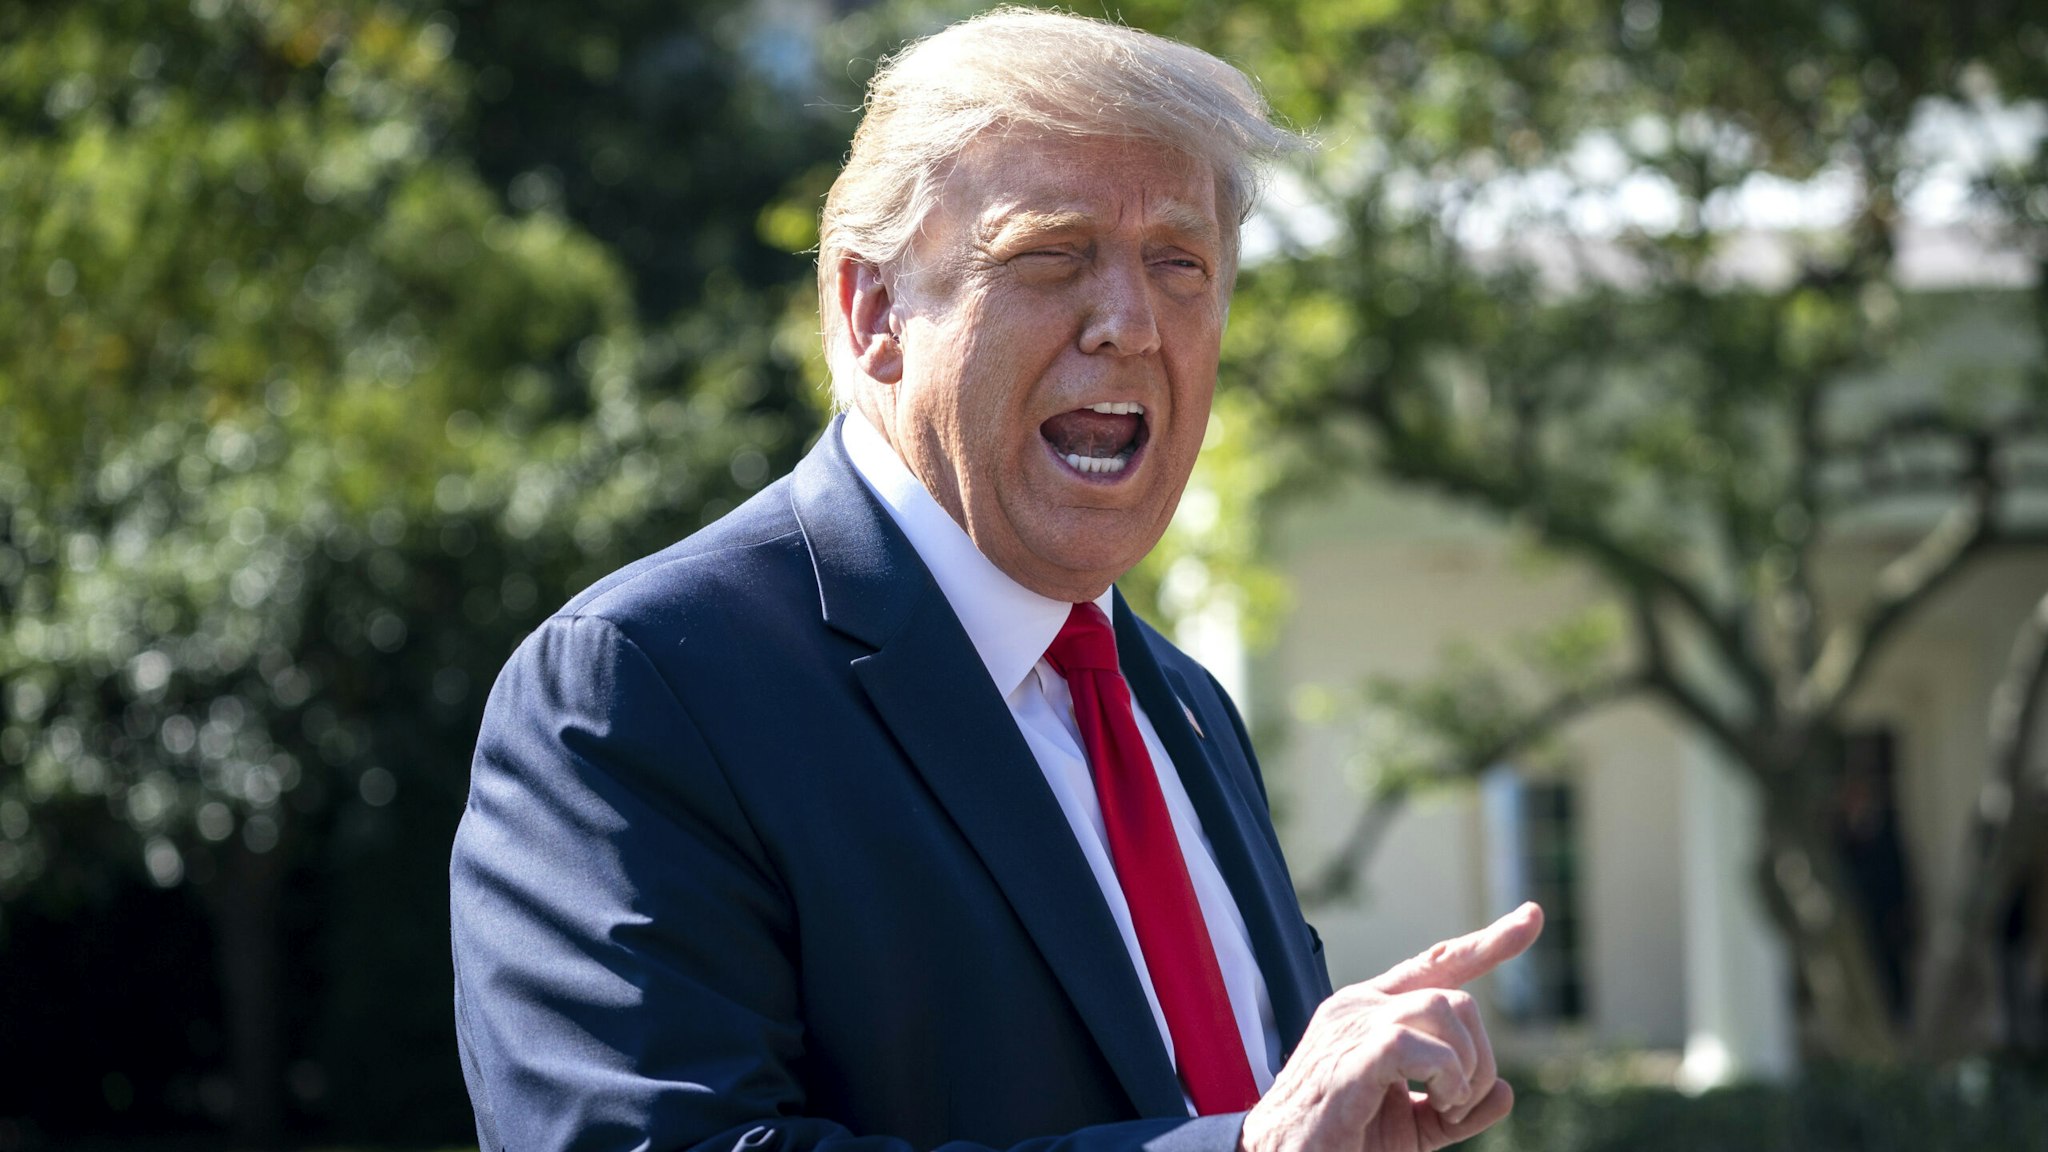 WASHINGTON, DC - SEPTEMBER 30: U.S. President Donald Trump speaks to reporters on his way to Marine One on the South Lawn of the White House on September 30, 2020 in Washington, DC. President Trump is traveling to Minnesota for a fundraising event and a campaign rally.